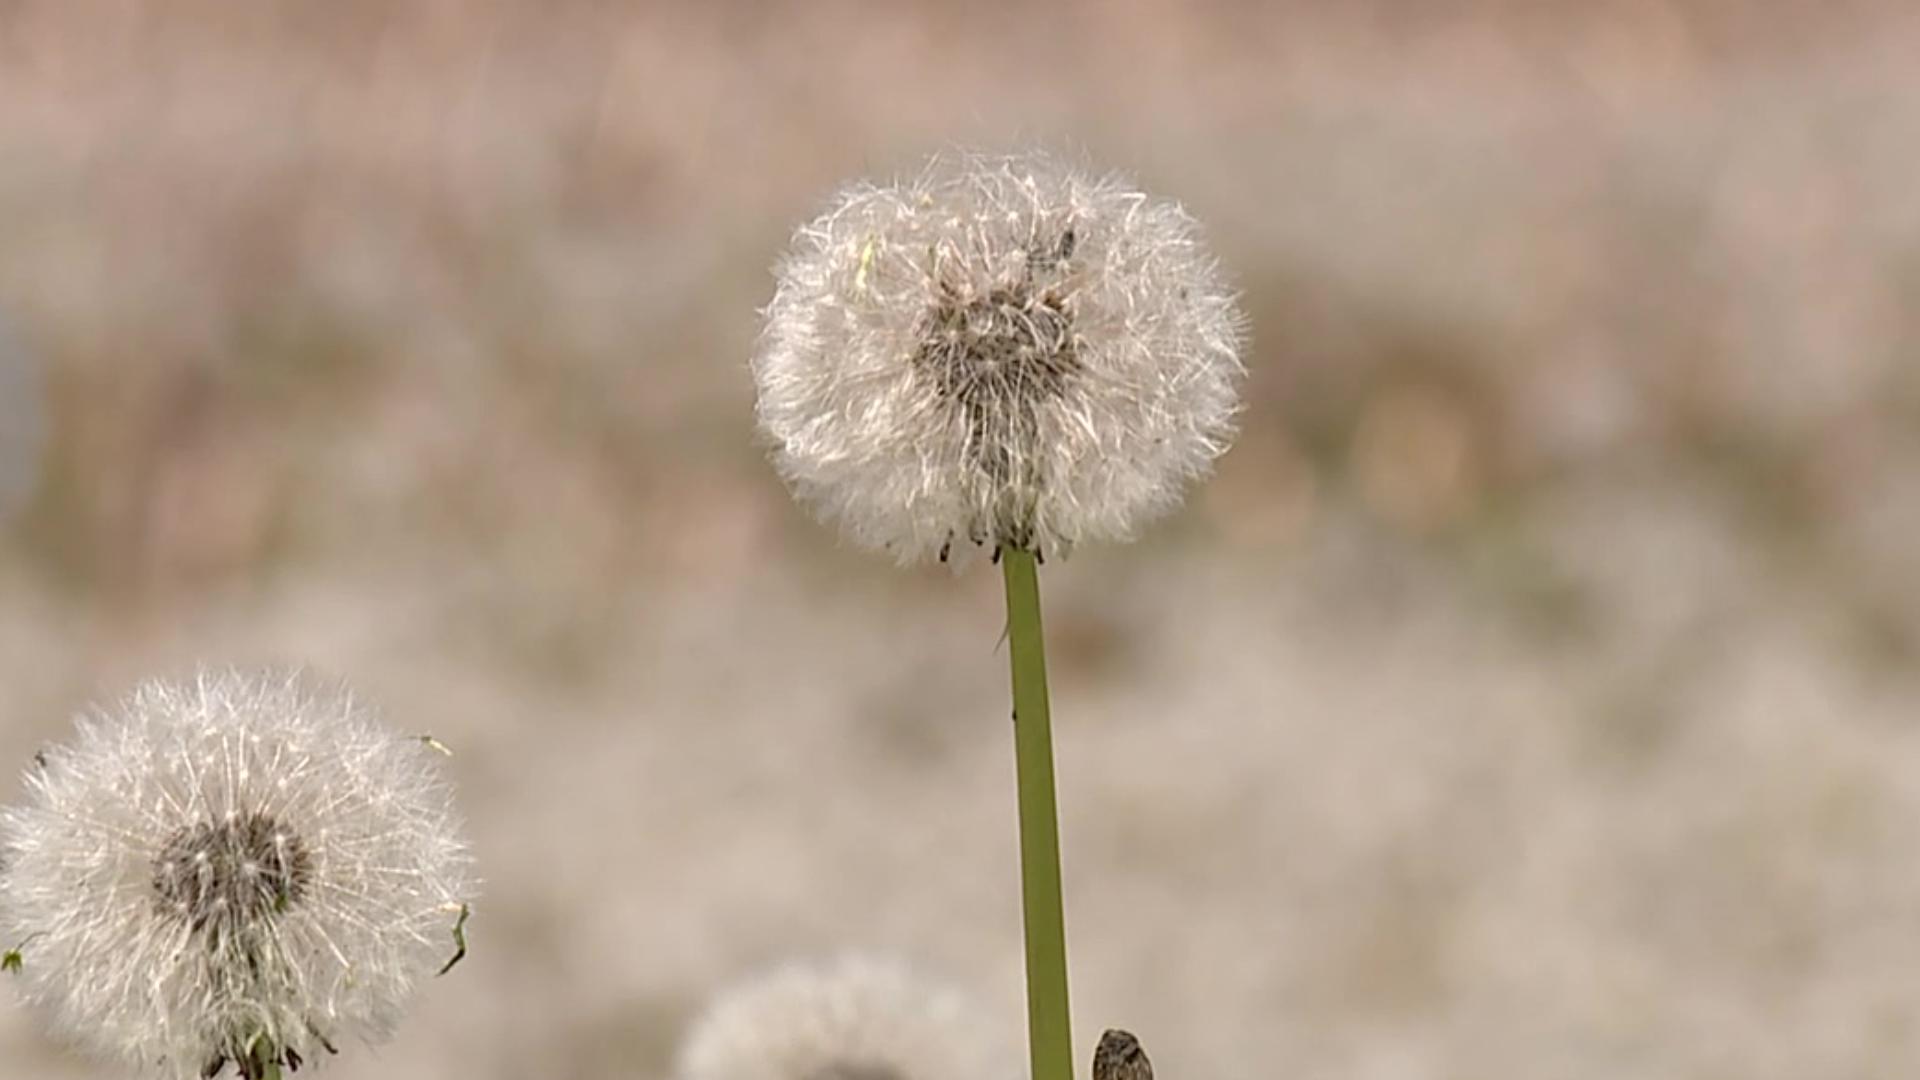 You may see them as a nuisance, but Jon Meyer is finding beauty in a field of dandelions.